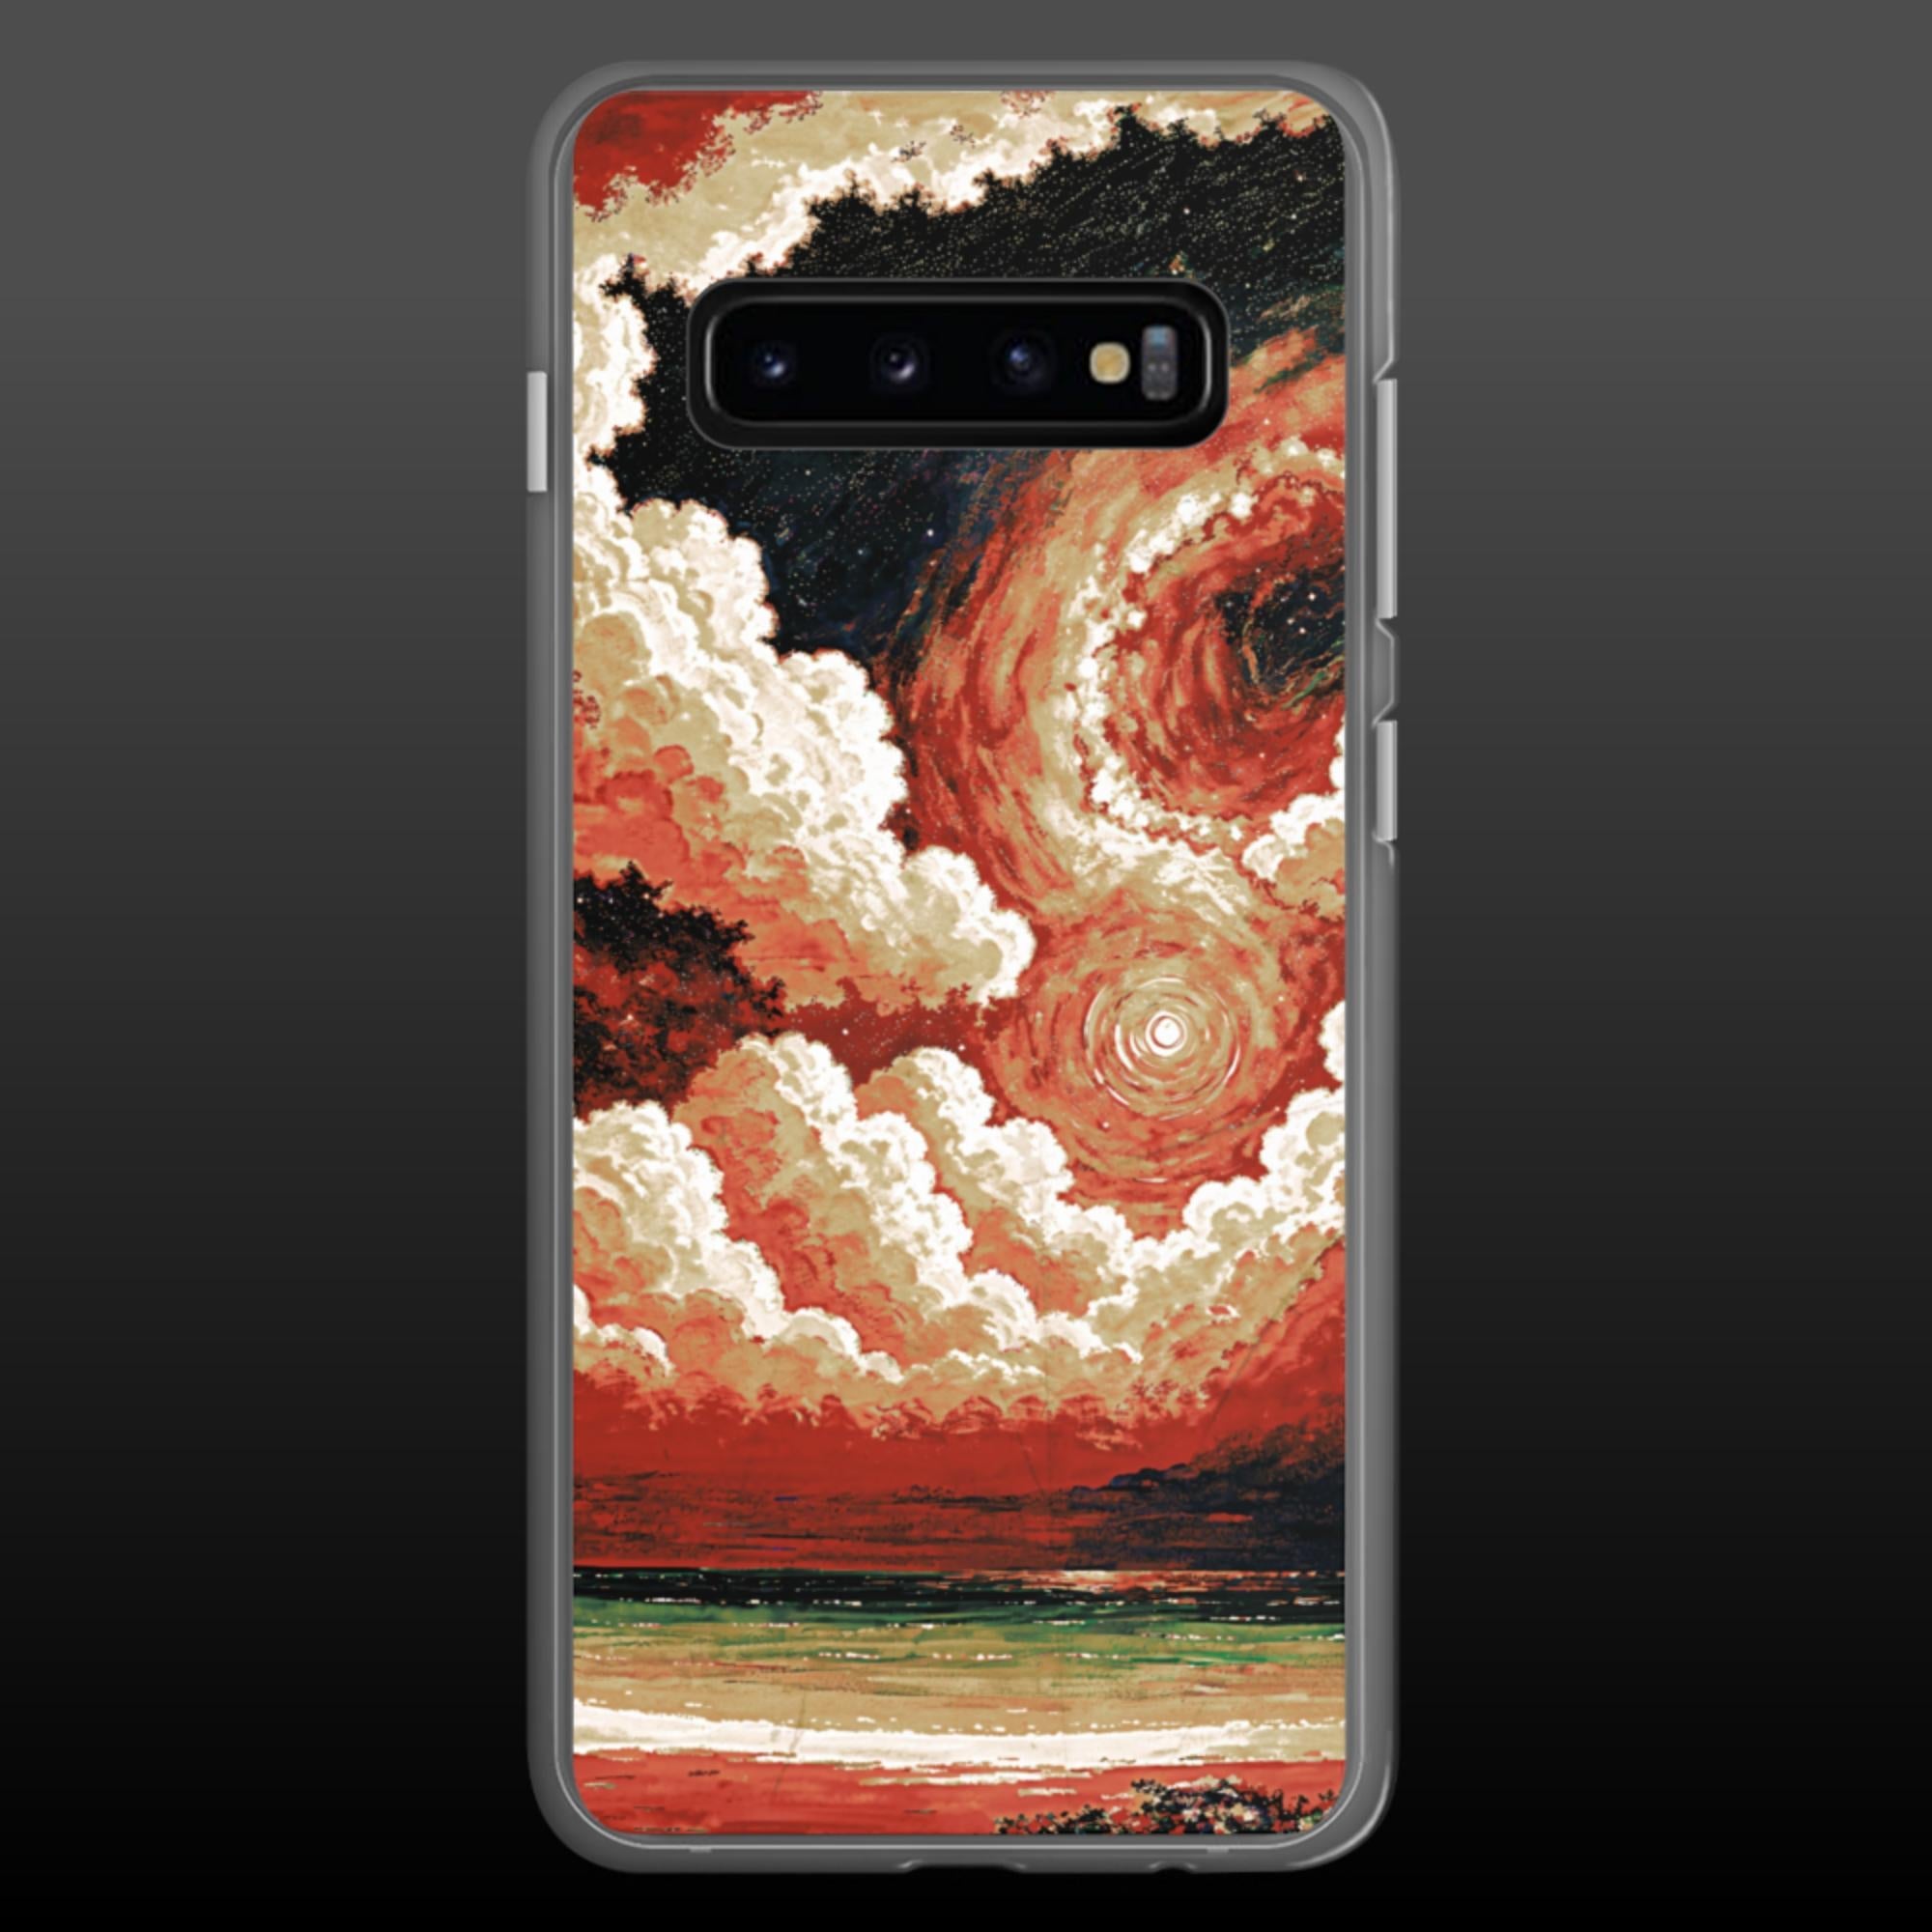 "Sinister vortex" clear samsung case - Clear samsung case - Ever colorful